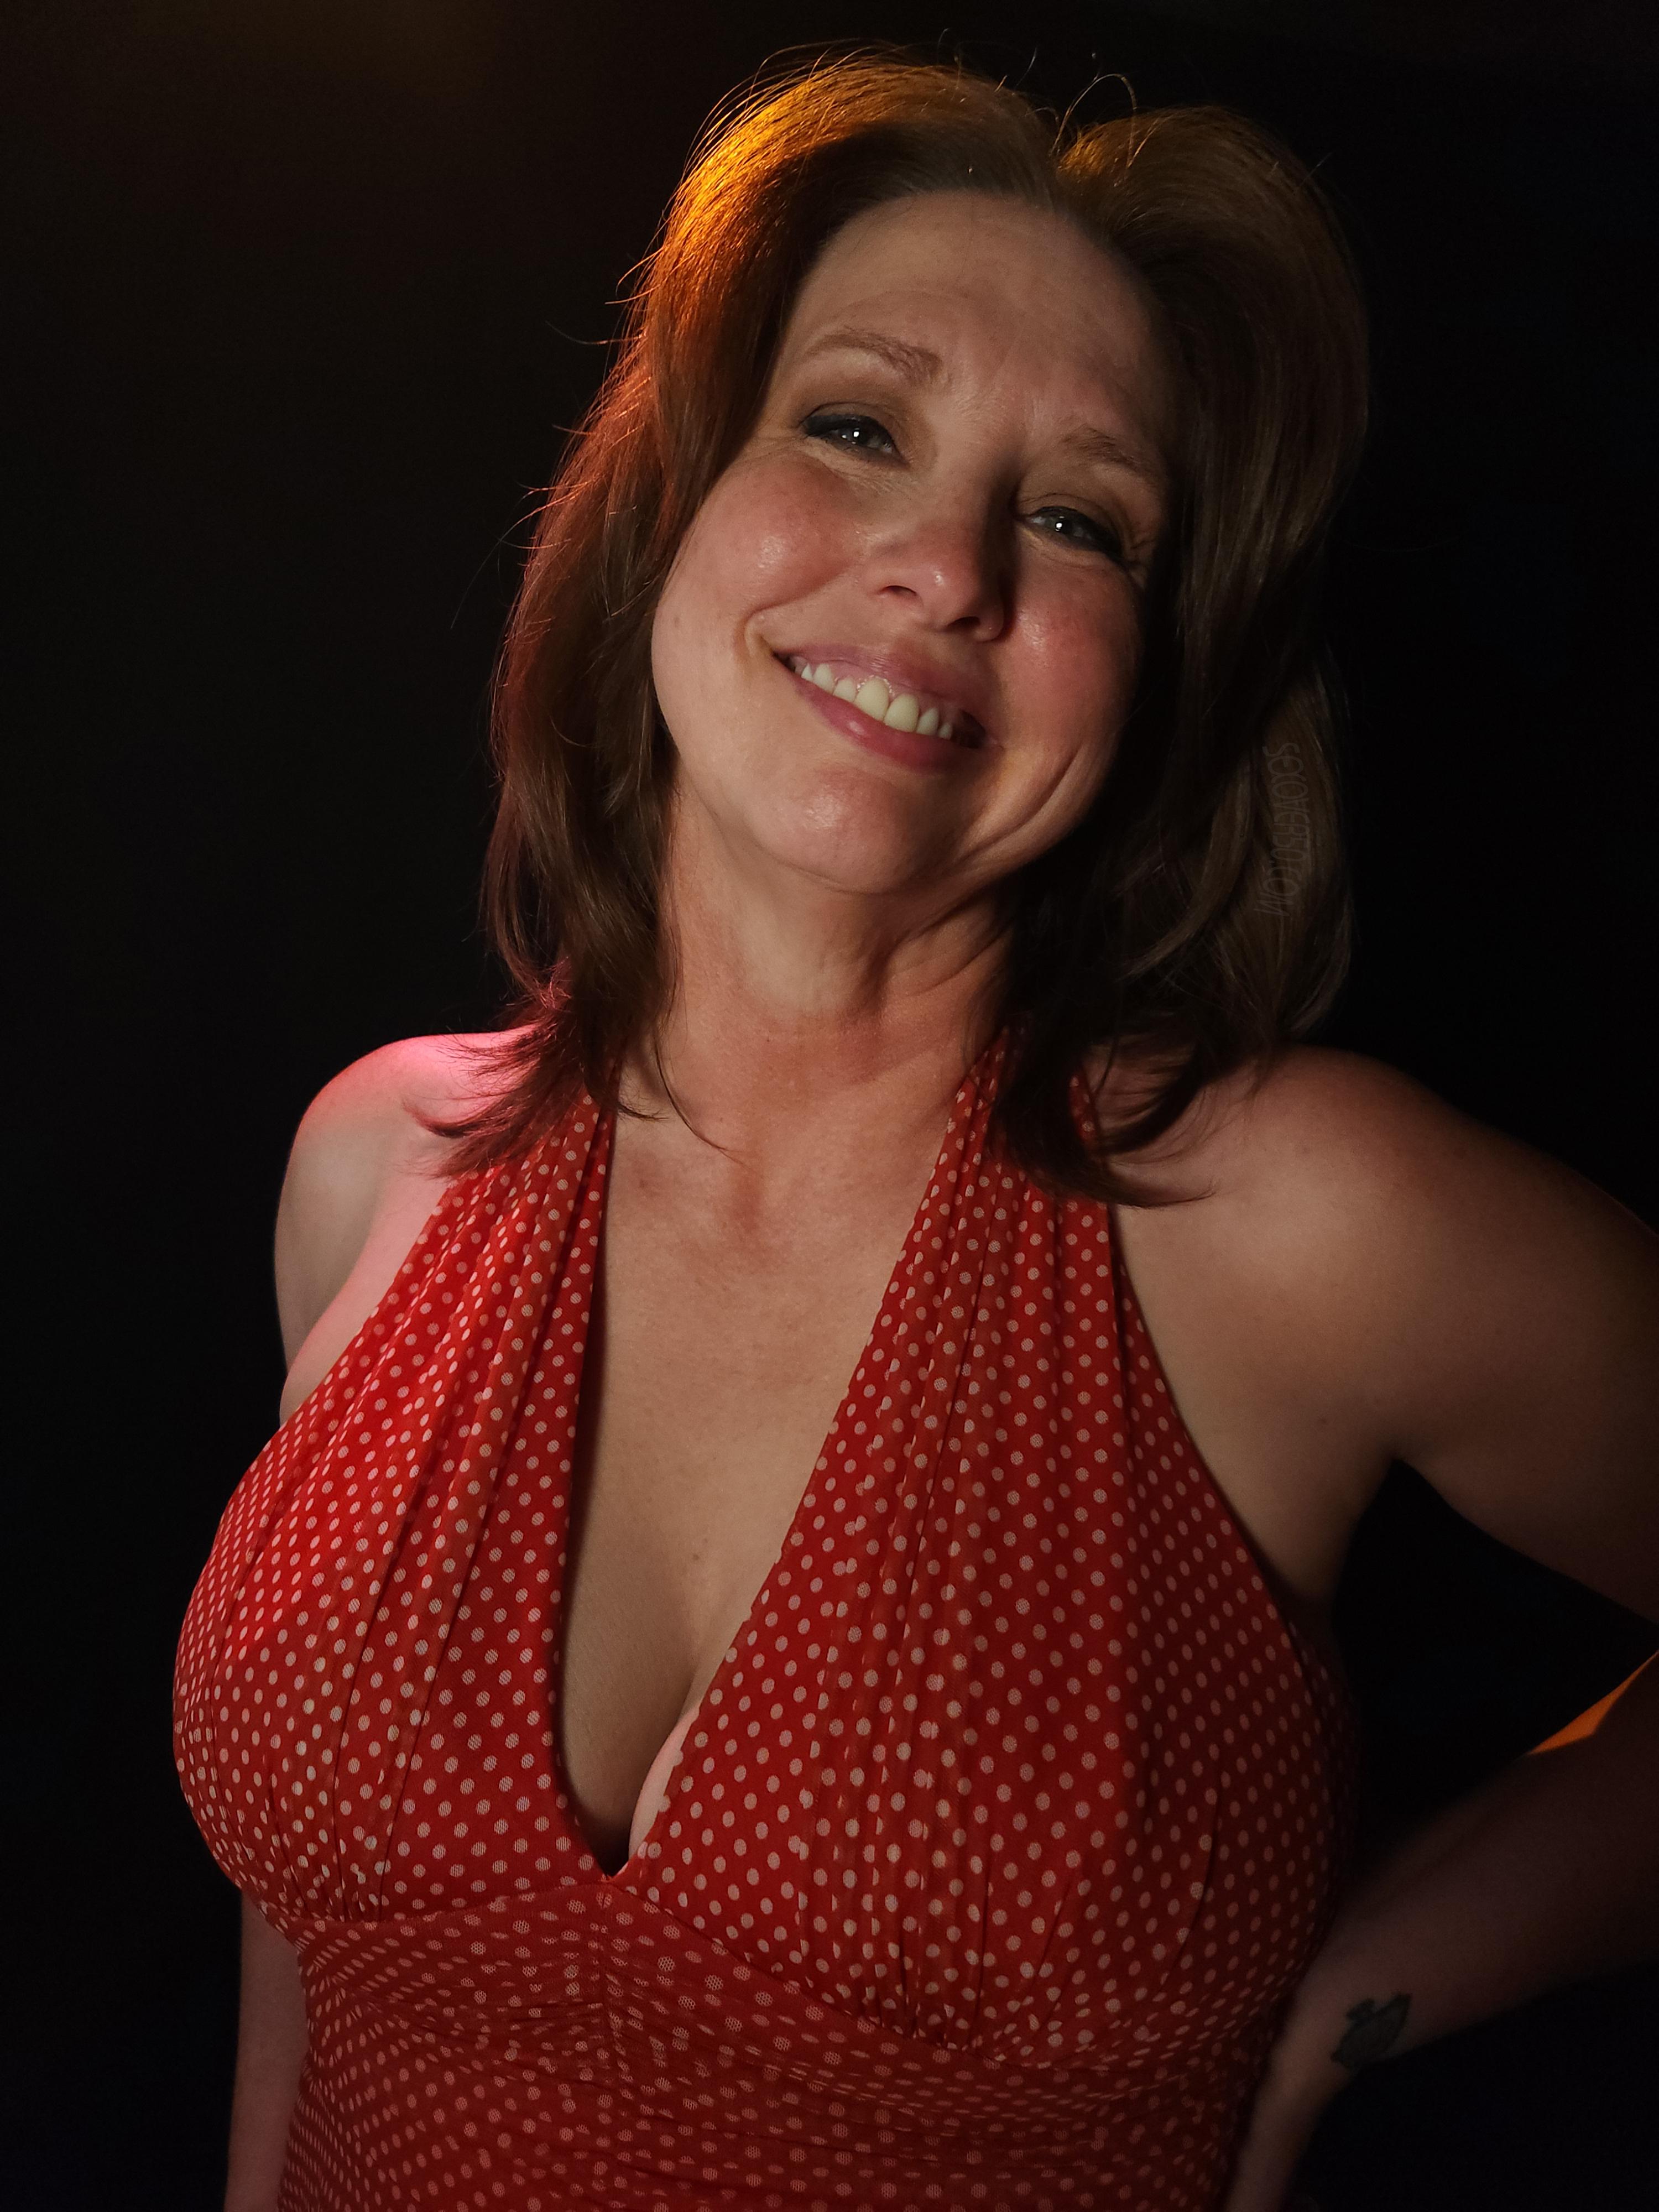 Autumn In her red dress photo gallery by Sex Over 50